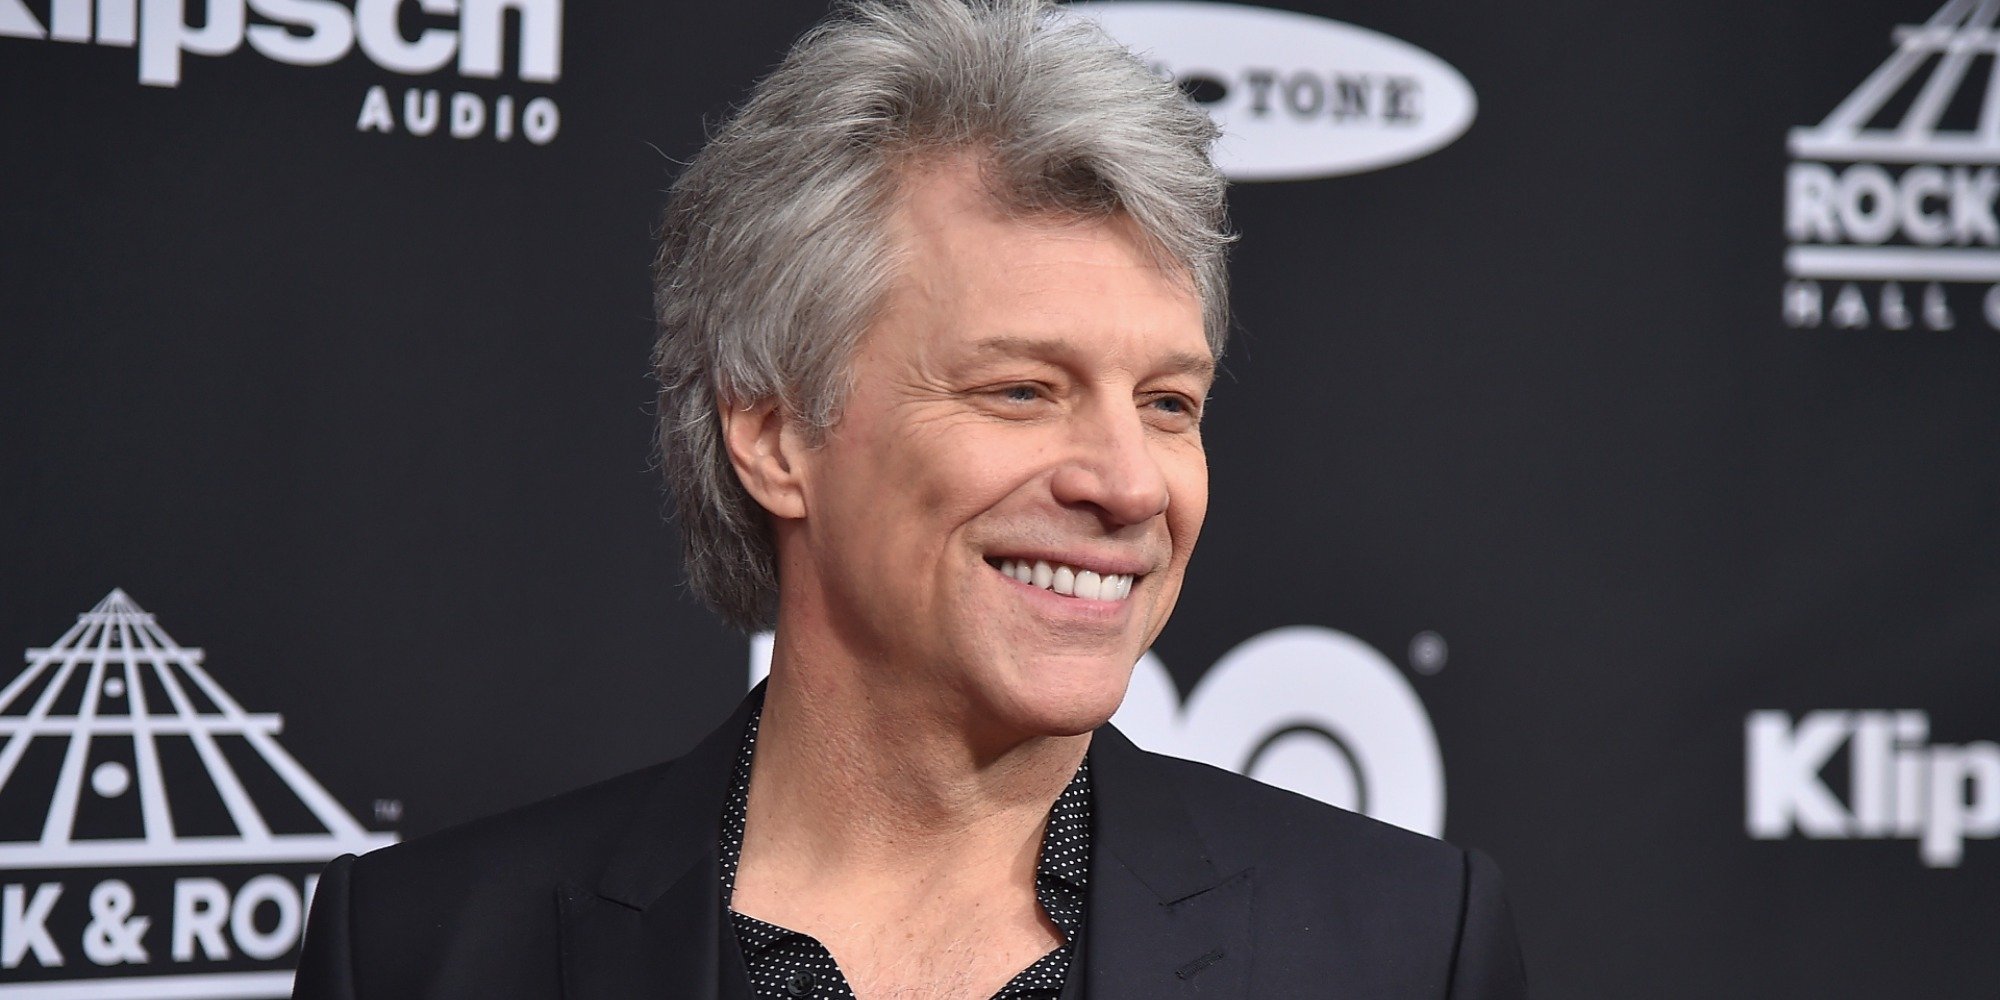 Jon Bon Jovi on the red carpet at the Rock and Roll Hall of Fame Induction Ceremony.